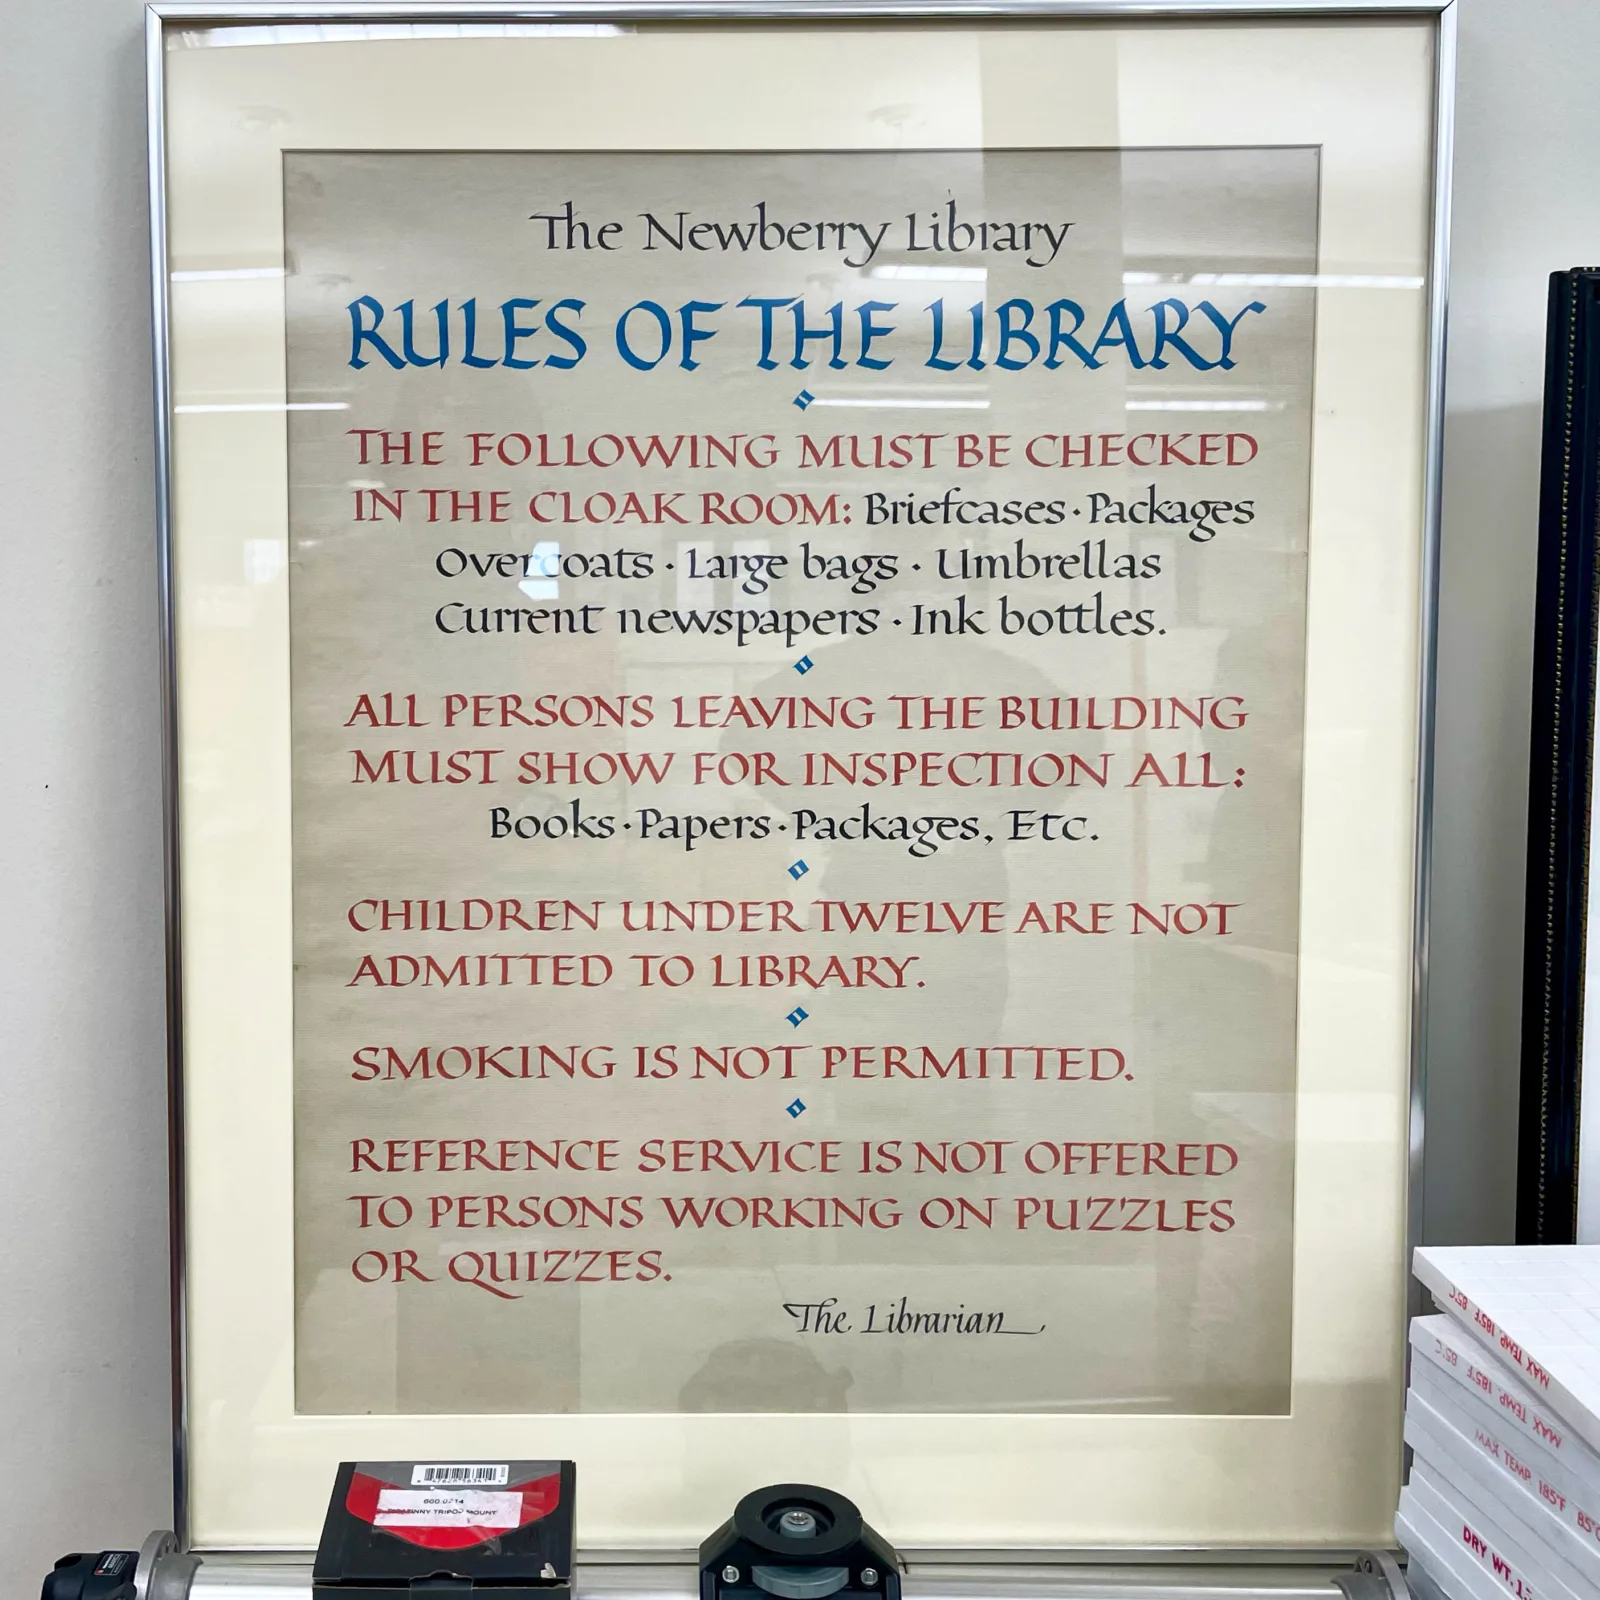 The sign reads the following: "The Newberry Library. Rules of the Library. The following must be checked at the cloak room: briefcases, packages, overcoats, large bags, umbrellas, current newspapers, ink bottles. All persons leaving the building must show for inspection all: books, papers, packages, etc. Children under twelve are not admitted to library. Smoking is not permitted. Reference service is not offered to persons working on puzzles or quizzes. The librarian."